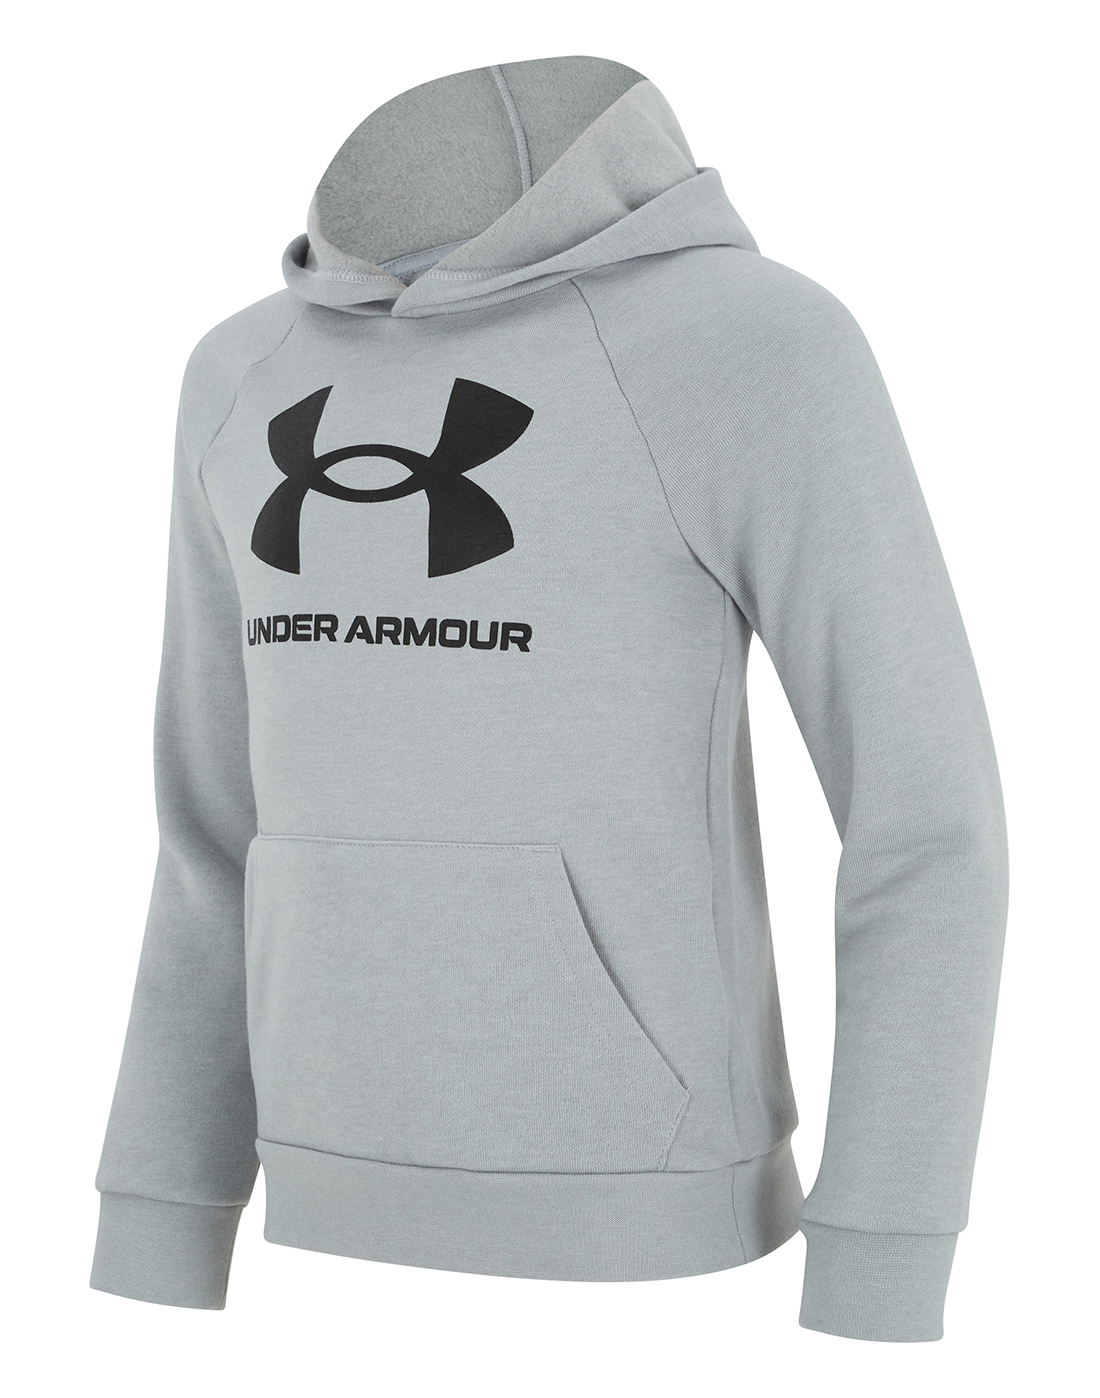 Under Armour Older Boys Rival Fleece Hoodie - Grey | Life Style Sports IE